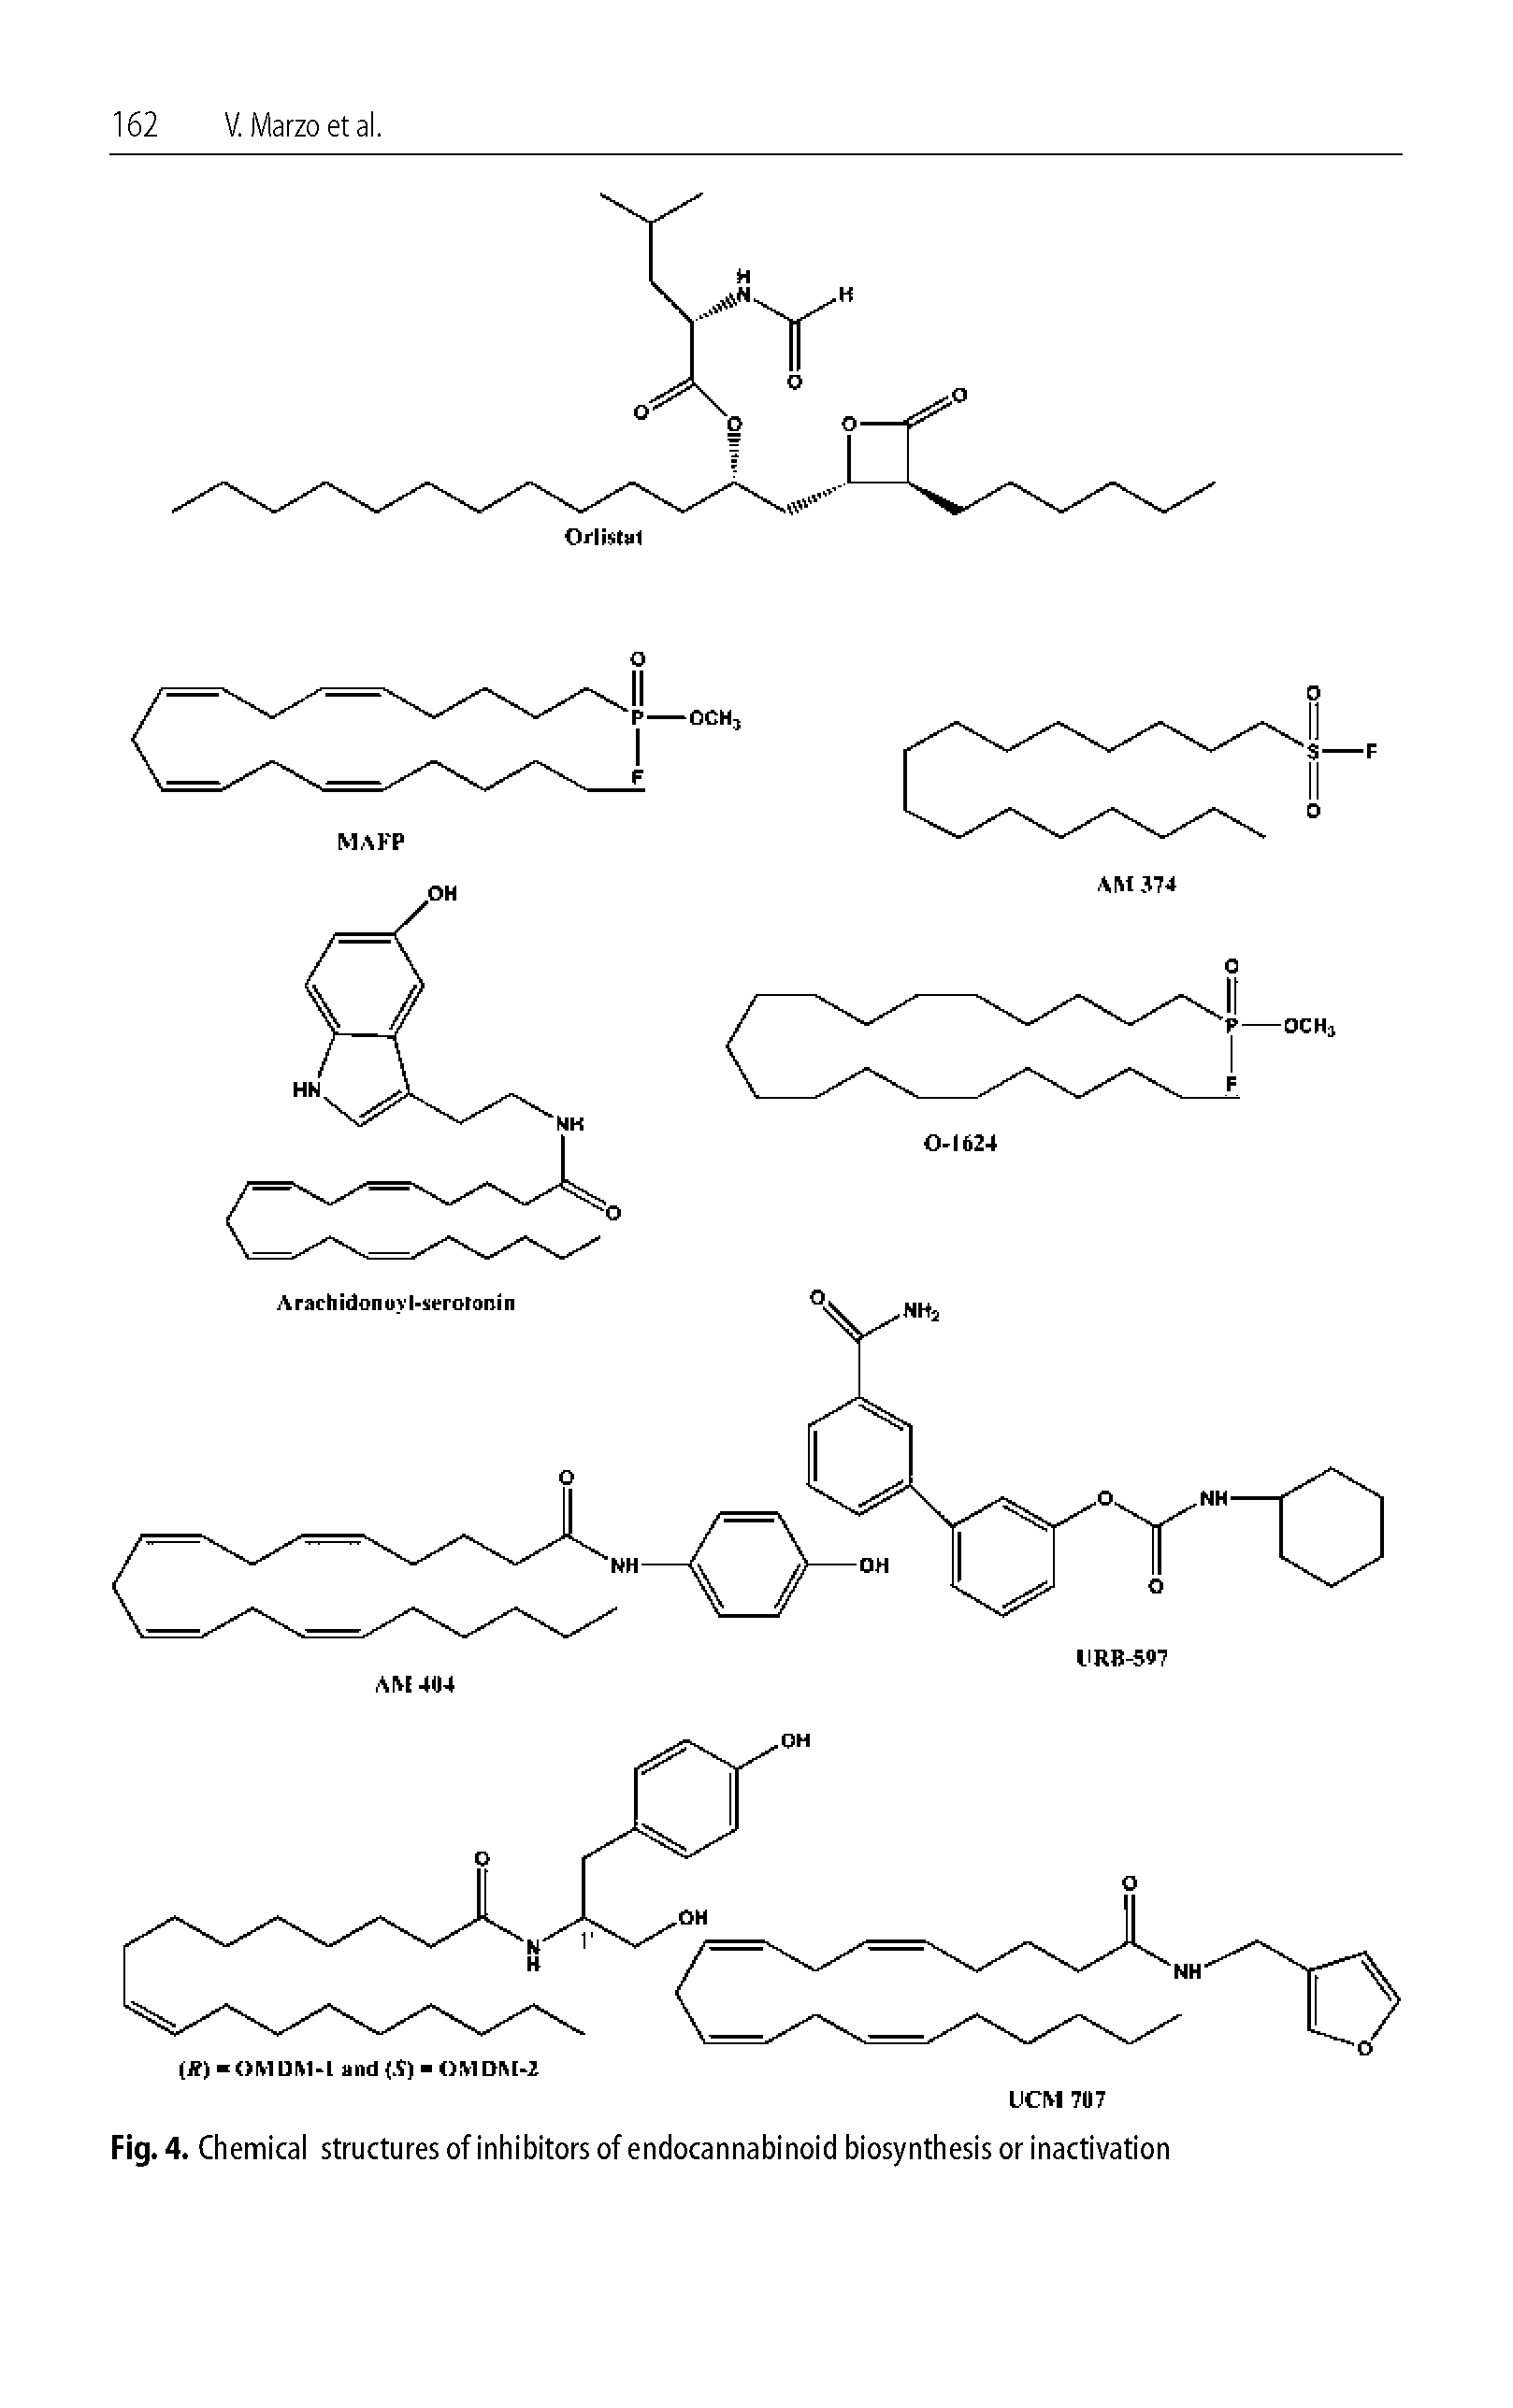 Fig. 4. Chemical structures of inhibitors of endocannabinoid biosynthesis or inactivation...